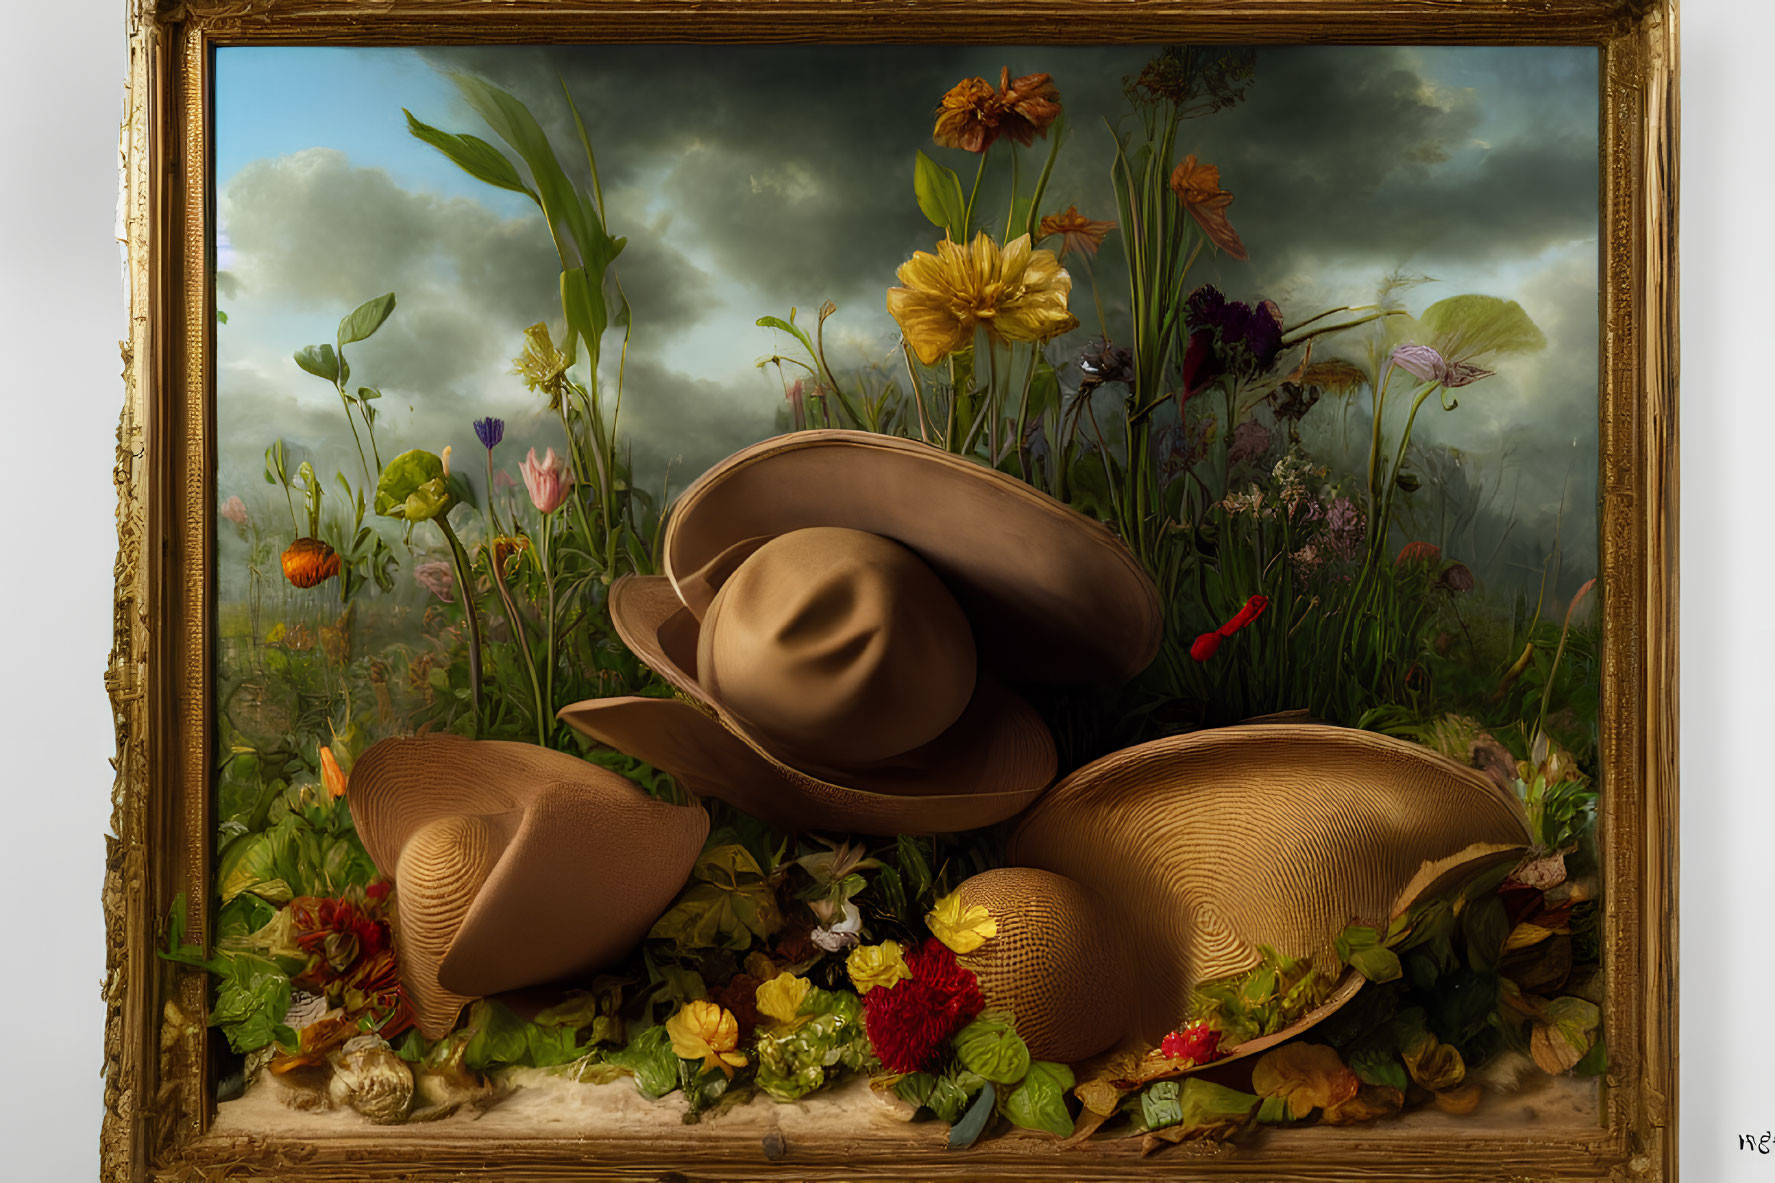 Photorealistic painting: Three straw hats among vibrant flowers in gold frame